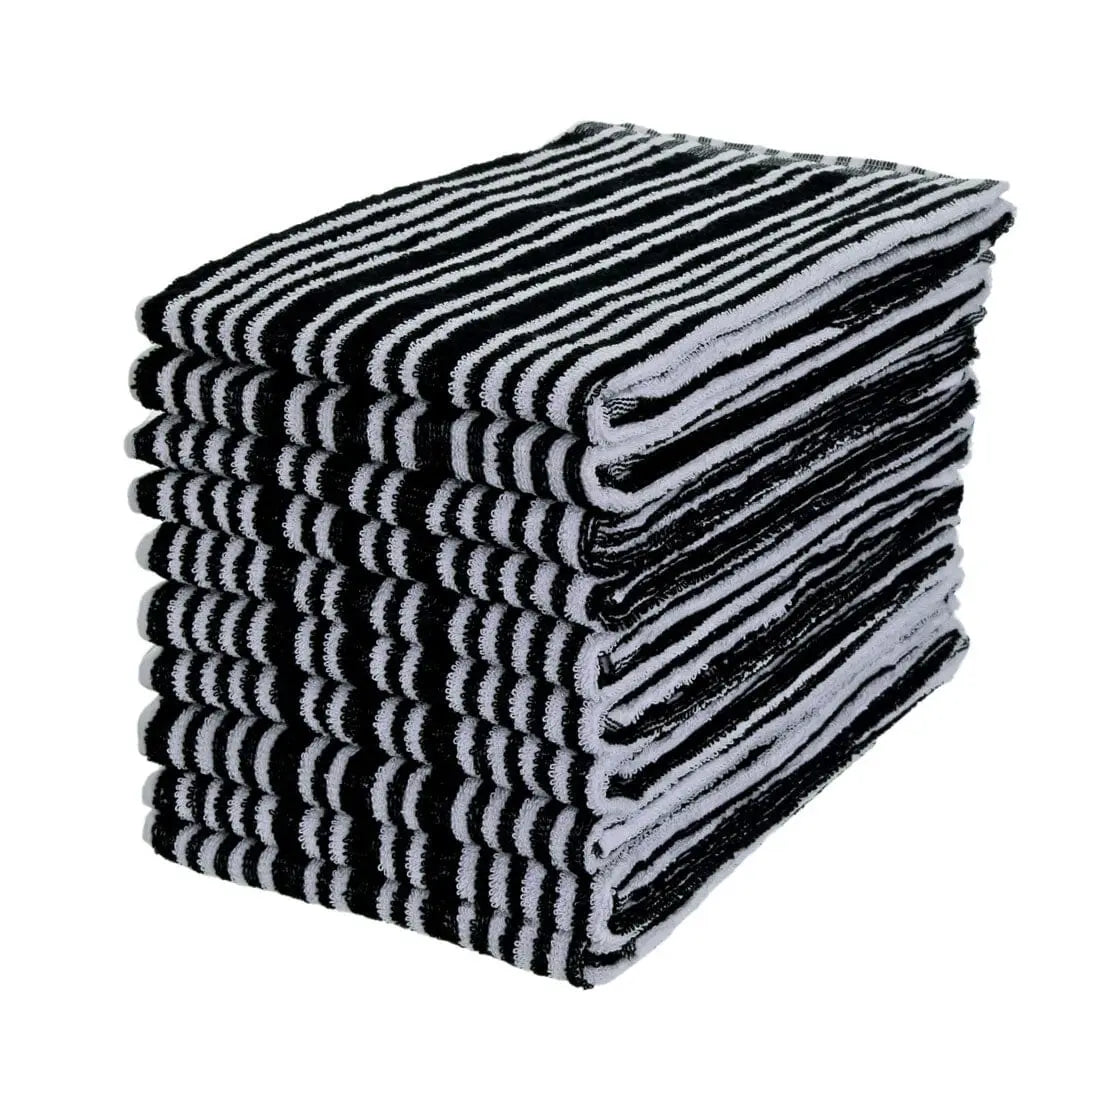 Hairdressing/Salon Tinting Towels, Pack of 12   